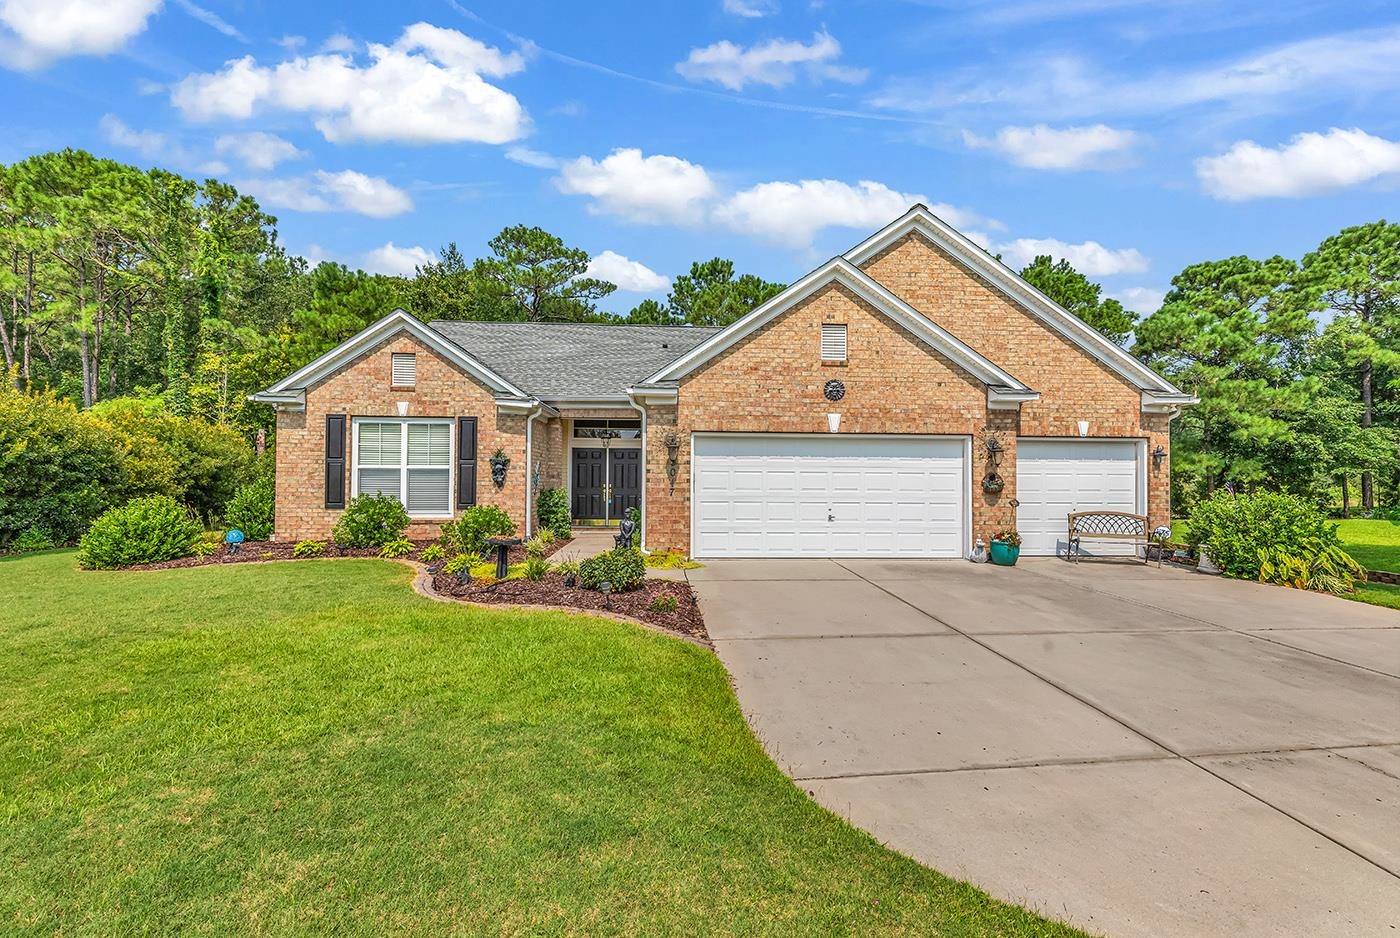 3017 Winding River Dr. North Myrtle Beach, SC 29582